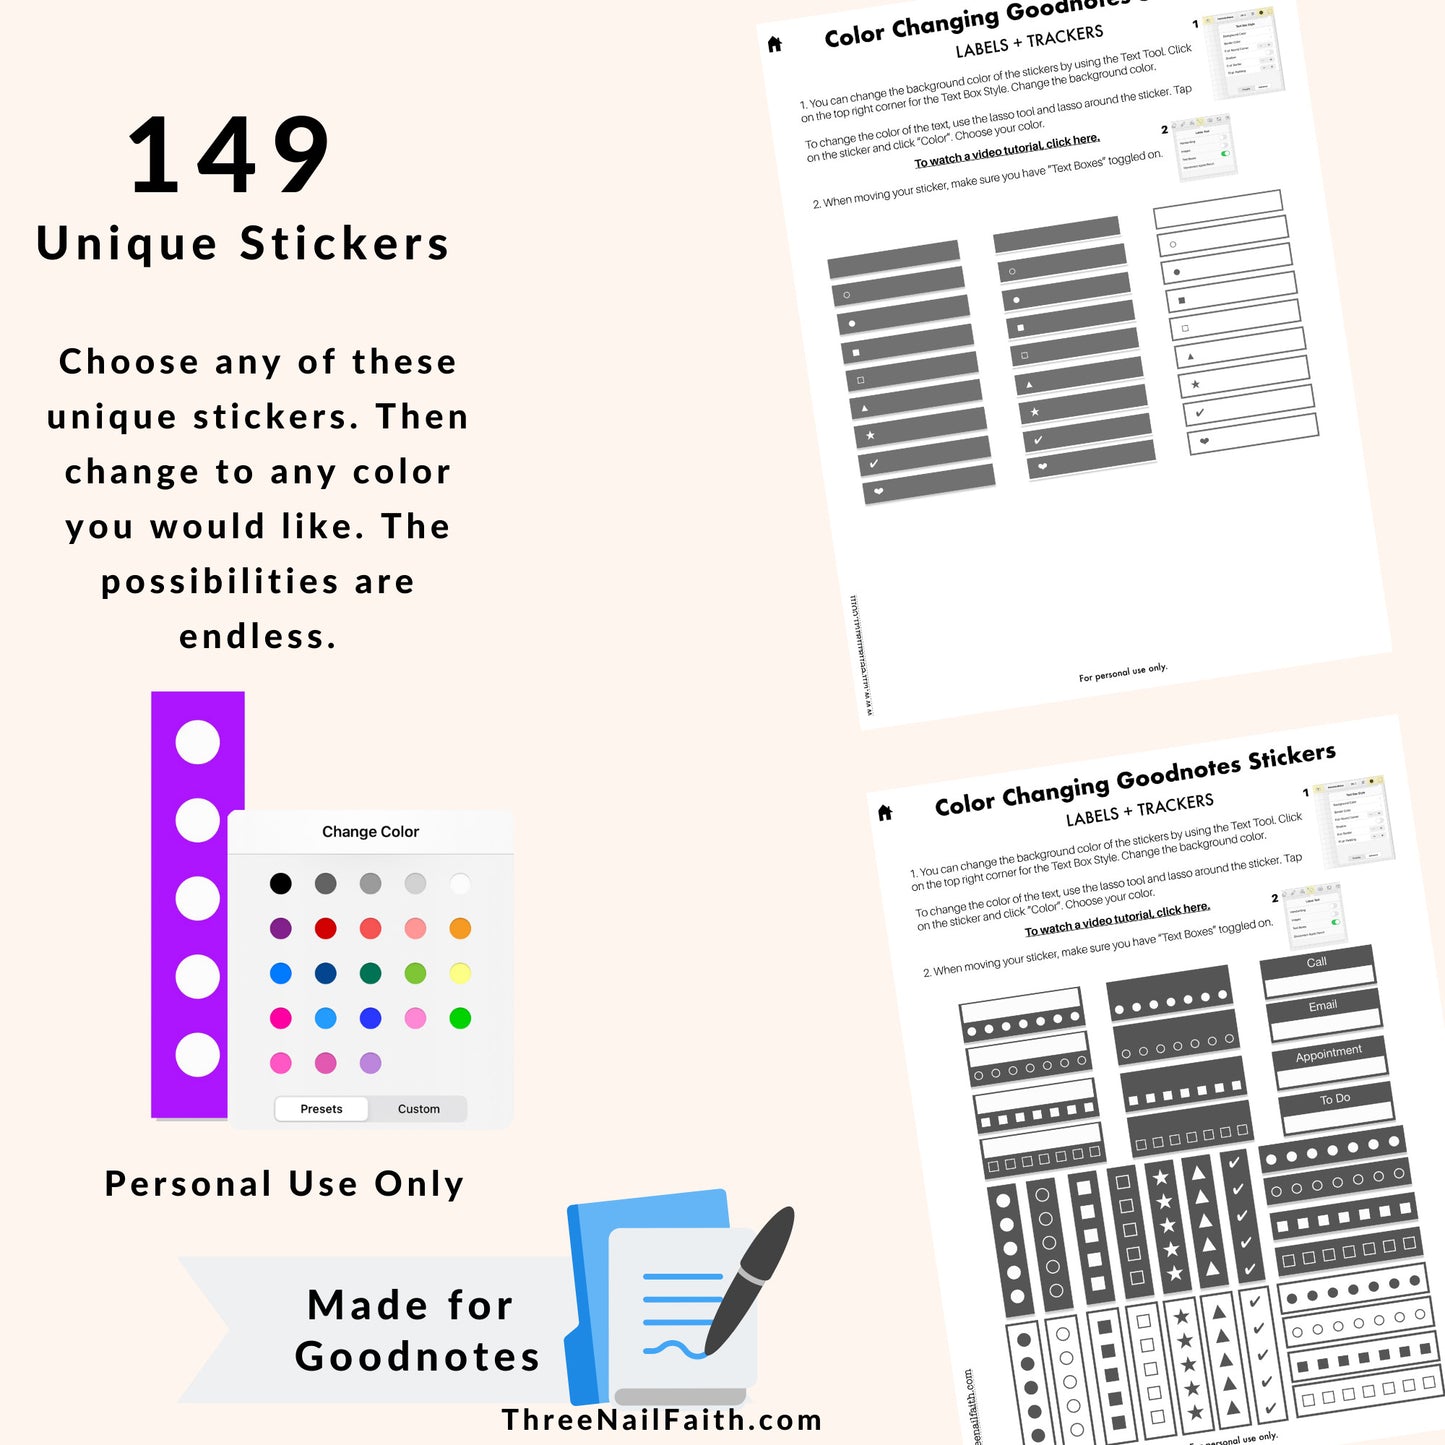 Color Changing Digital Sticker - Labels and Trackers